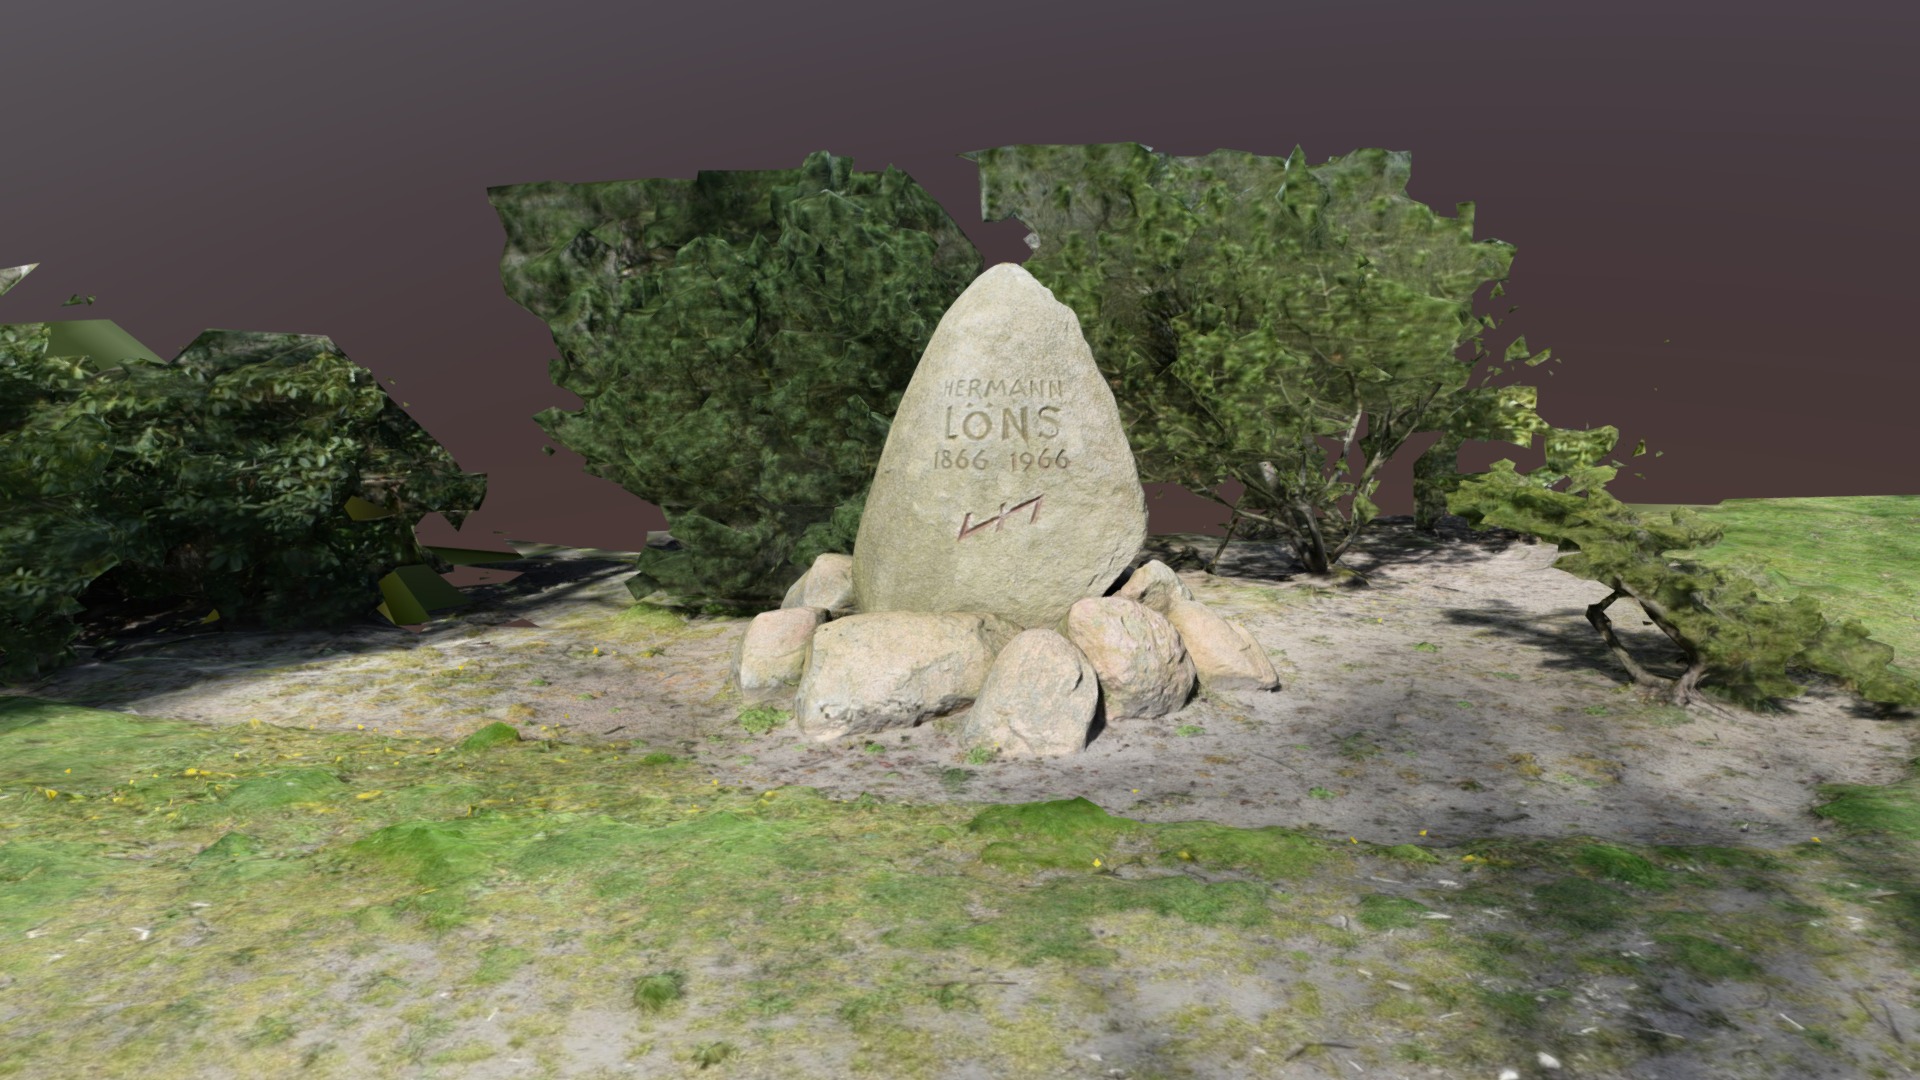 3D model Lönsstein - This is a 3D model of the Lönsstein. The 3D model is about a rock with a face carved into it.